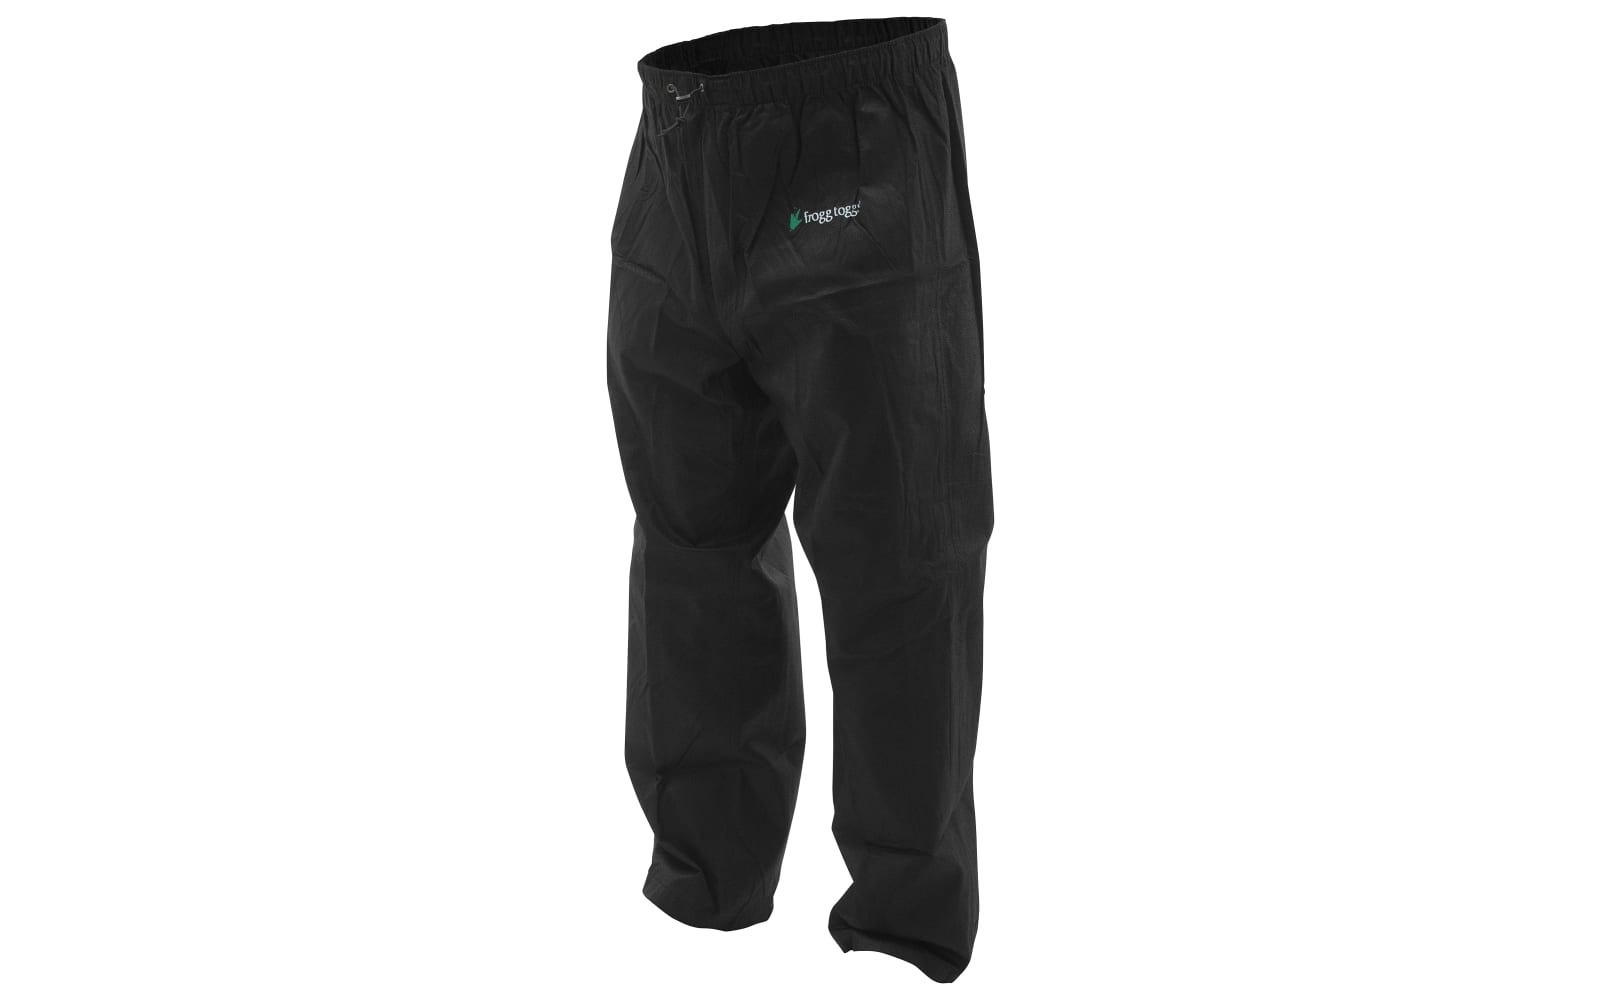 FROGG TOGGS Mens Classic Pro Action Waterproof Breathable Rain Pant Hiking 